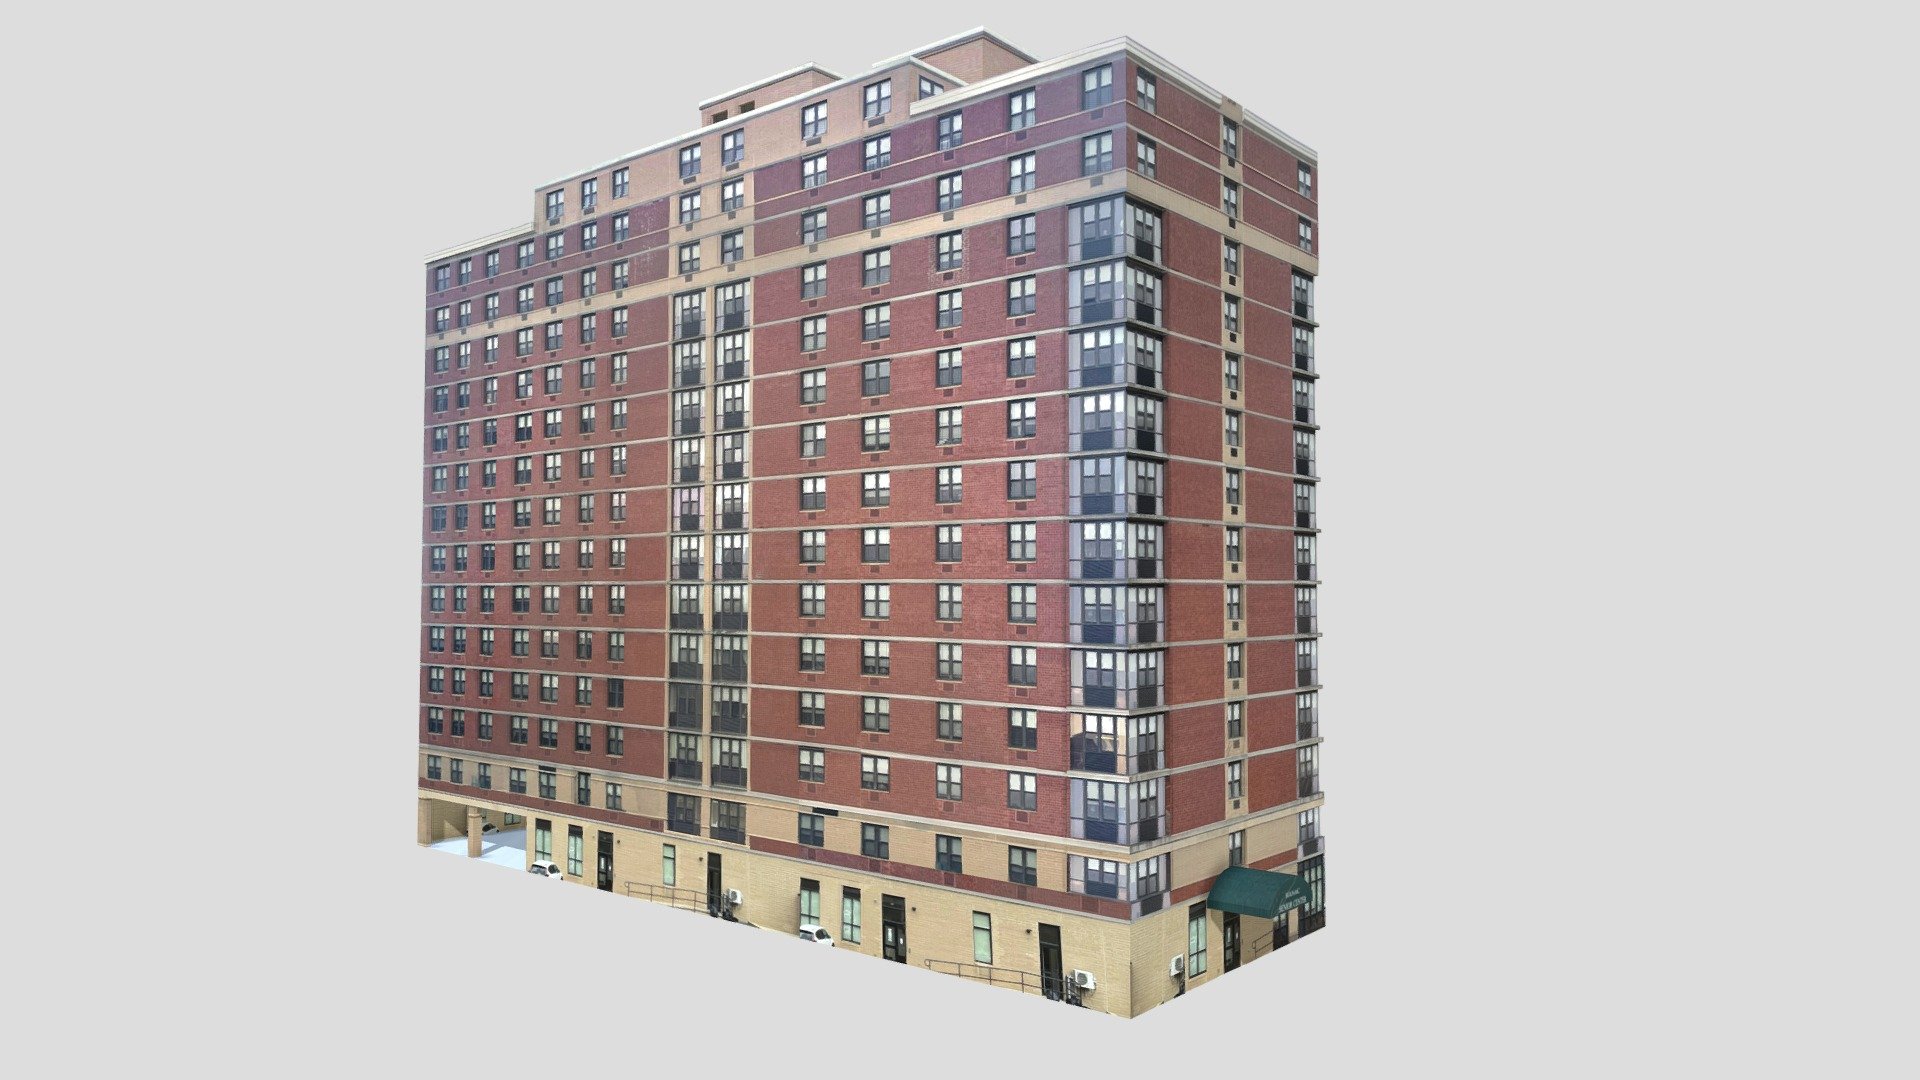 Modeled from a real building in Queens, NY. All textures photographed by me 3d model